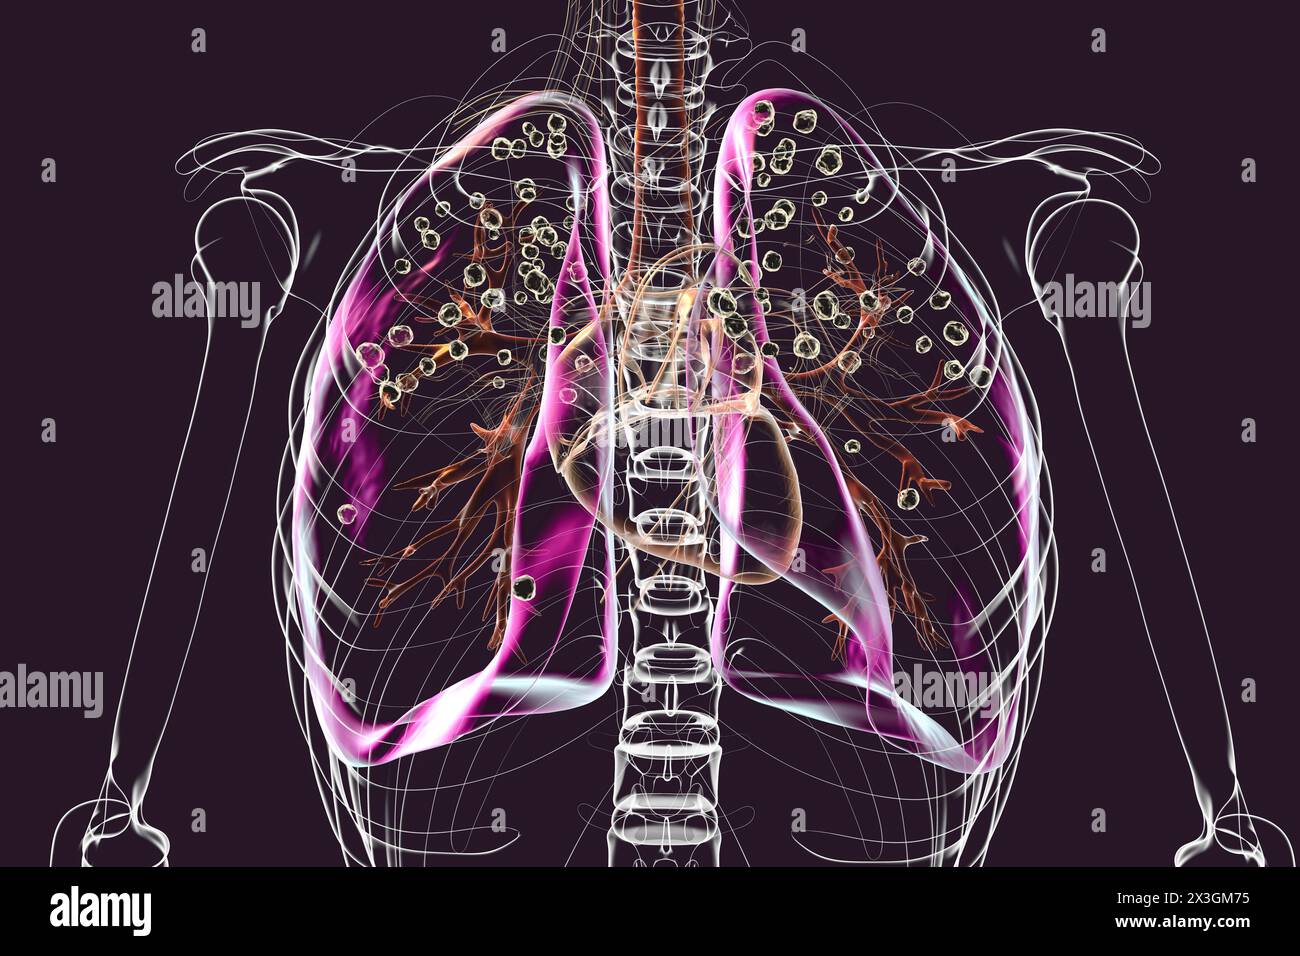 Illustration depicting lungs affected by silicosis within a transparent human body, emphasising respiratory health issues due to silica exposure and revealing dark silicotic nodules. Stock Photo